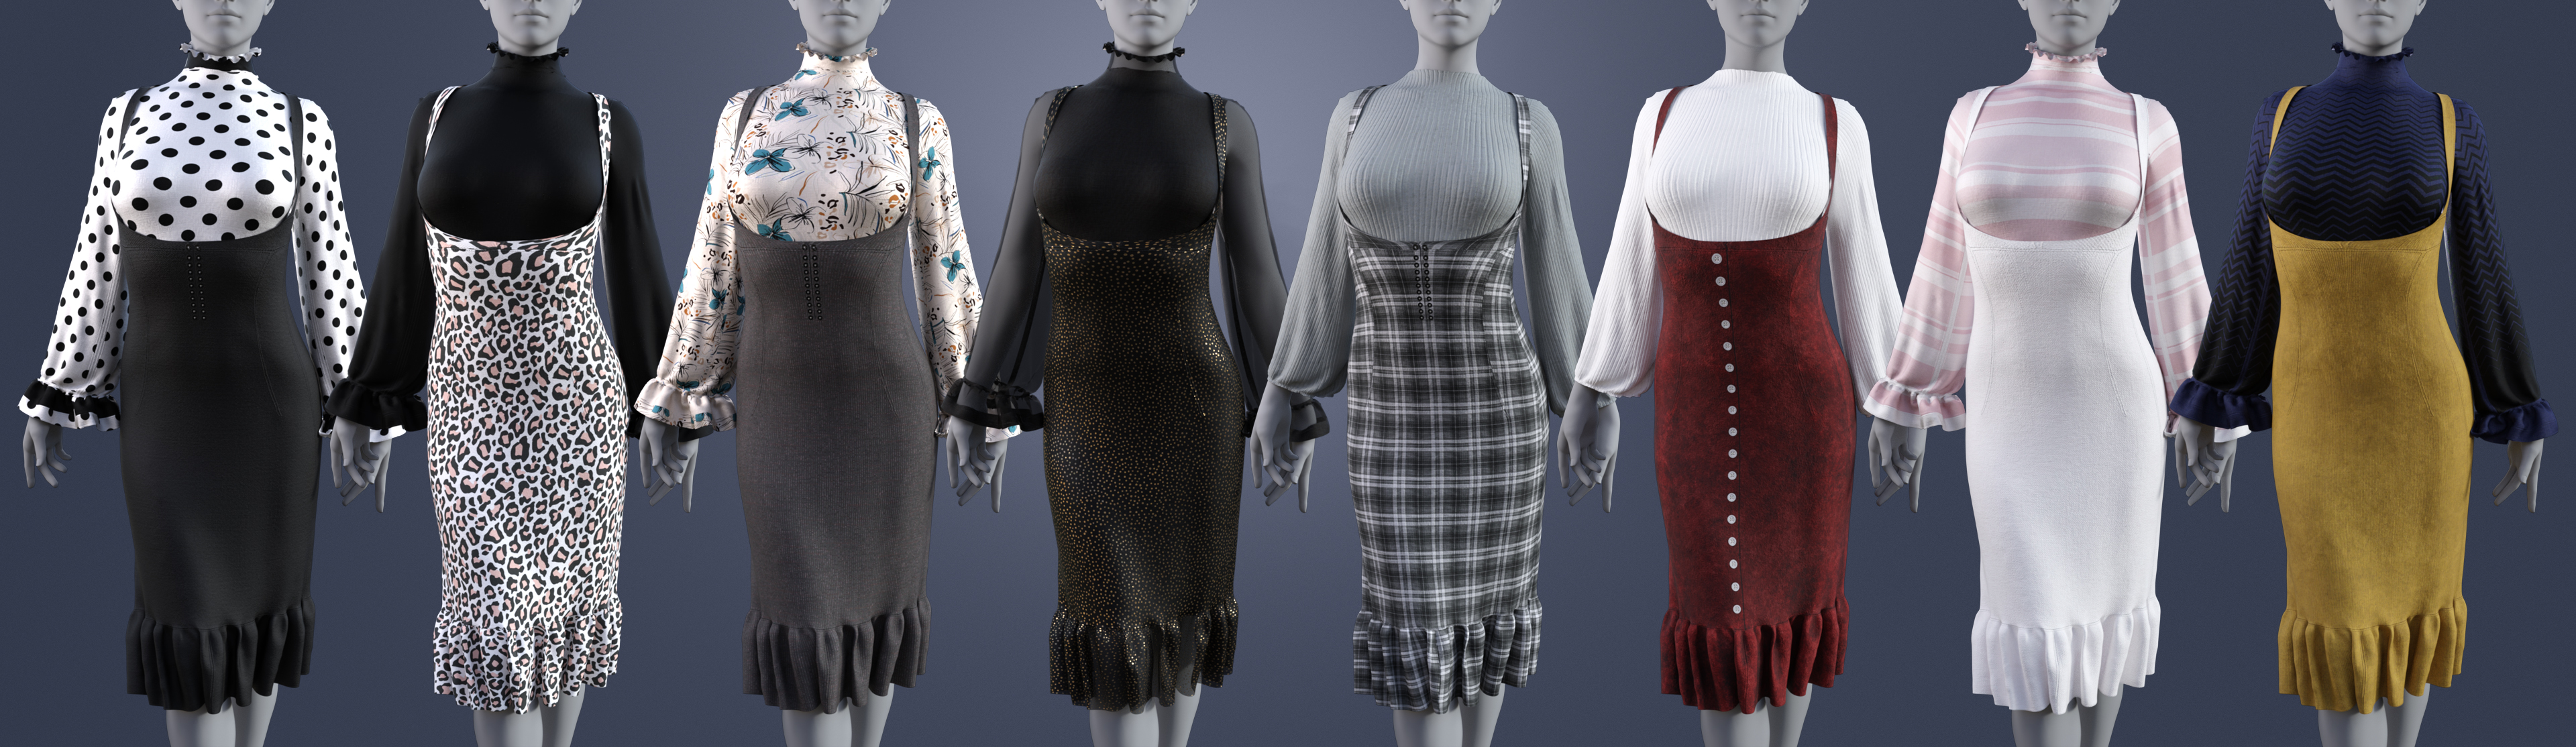 dForce Classy Pinafore Outfit for Genesis 8 Females by: Moonscape GraphicsSade, 3D Models by Daz 3D